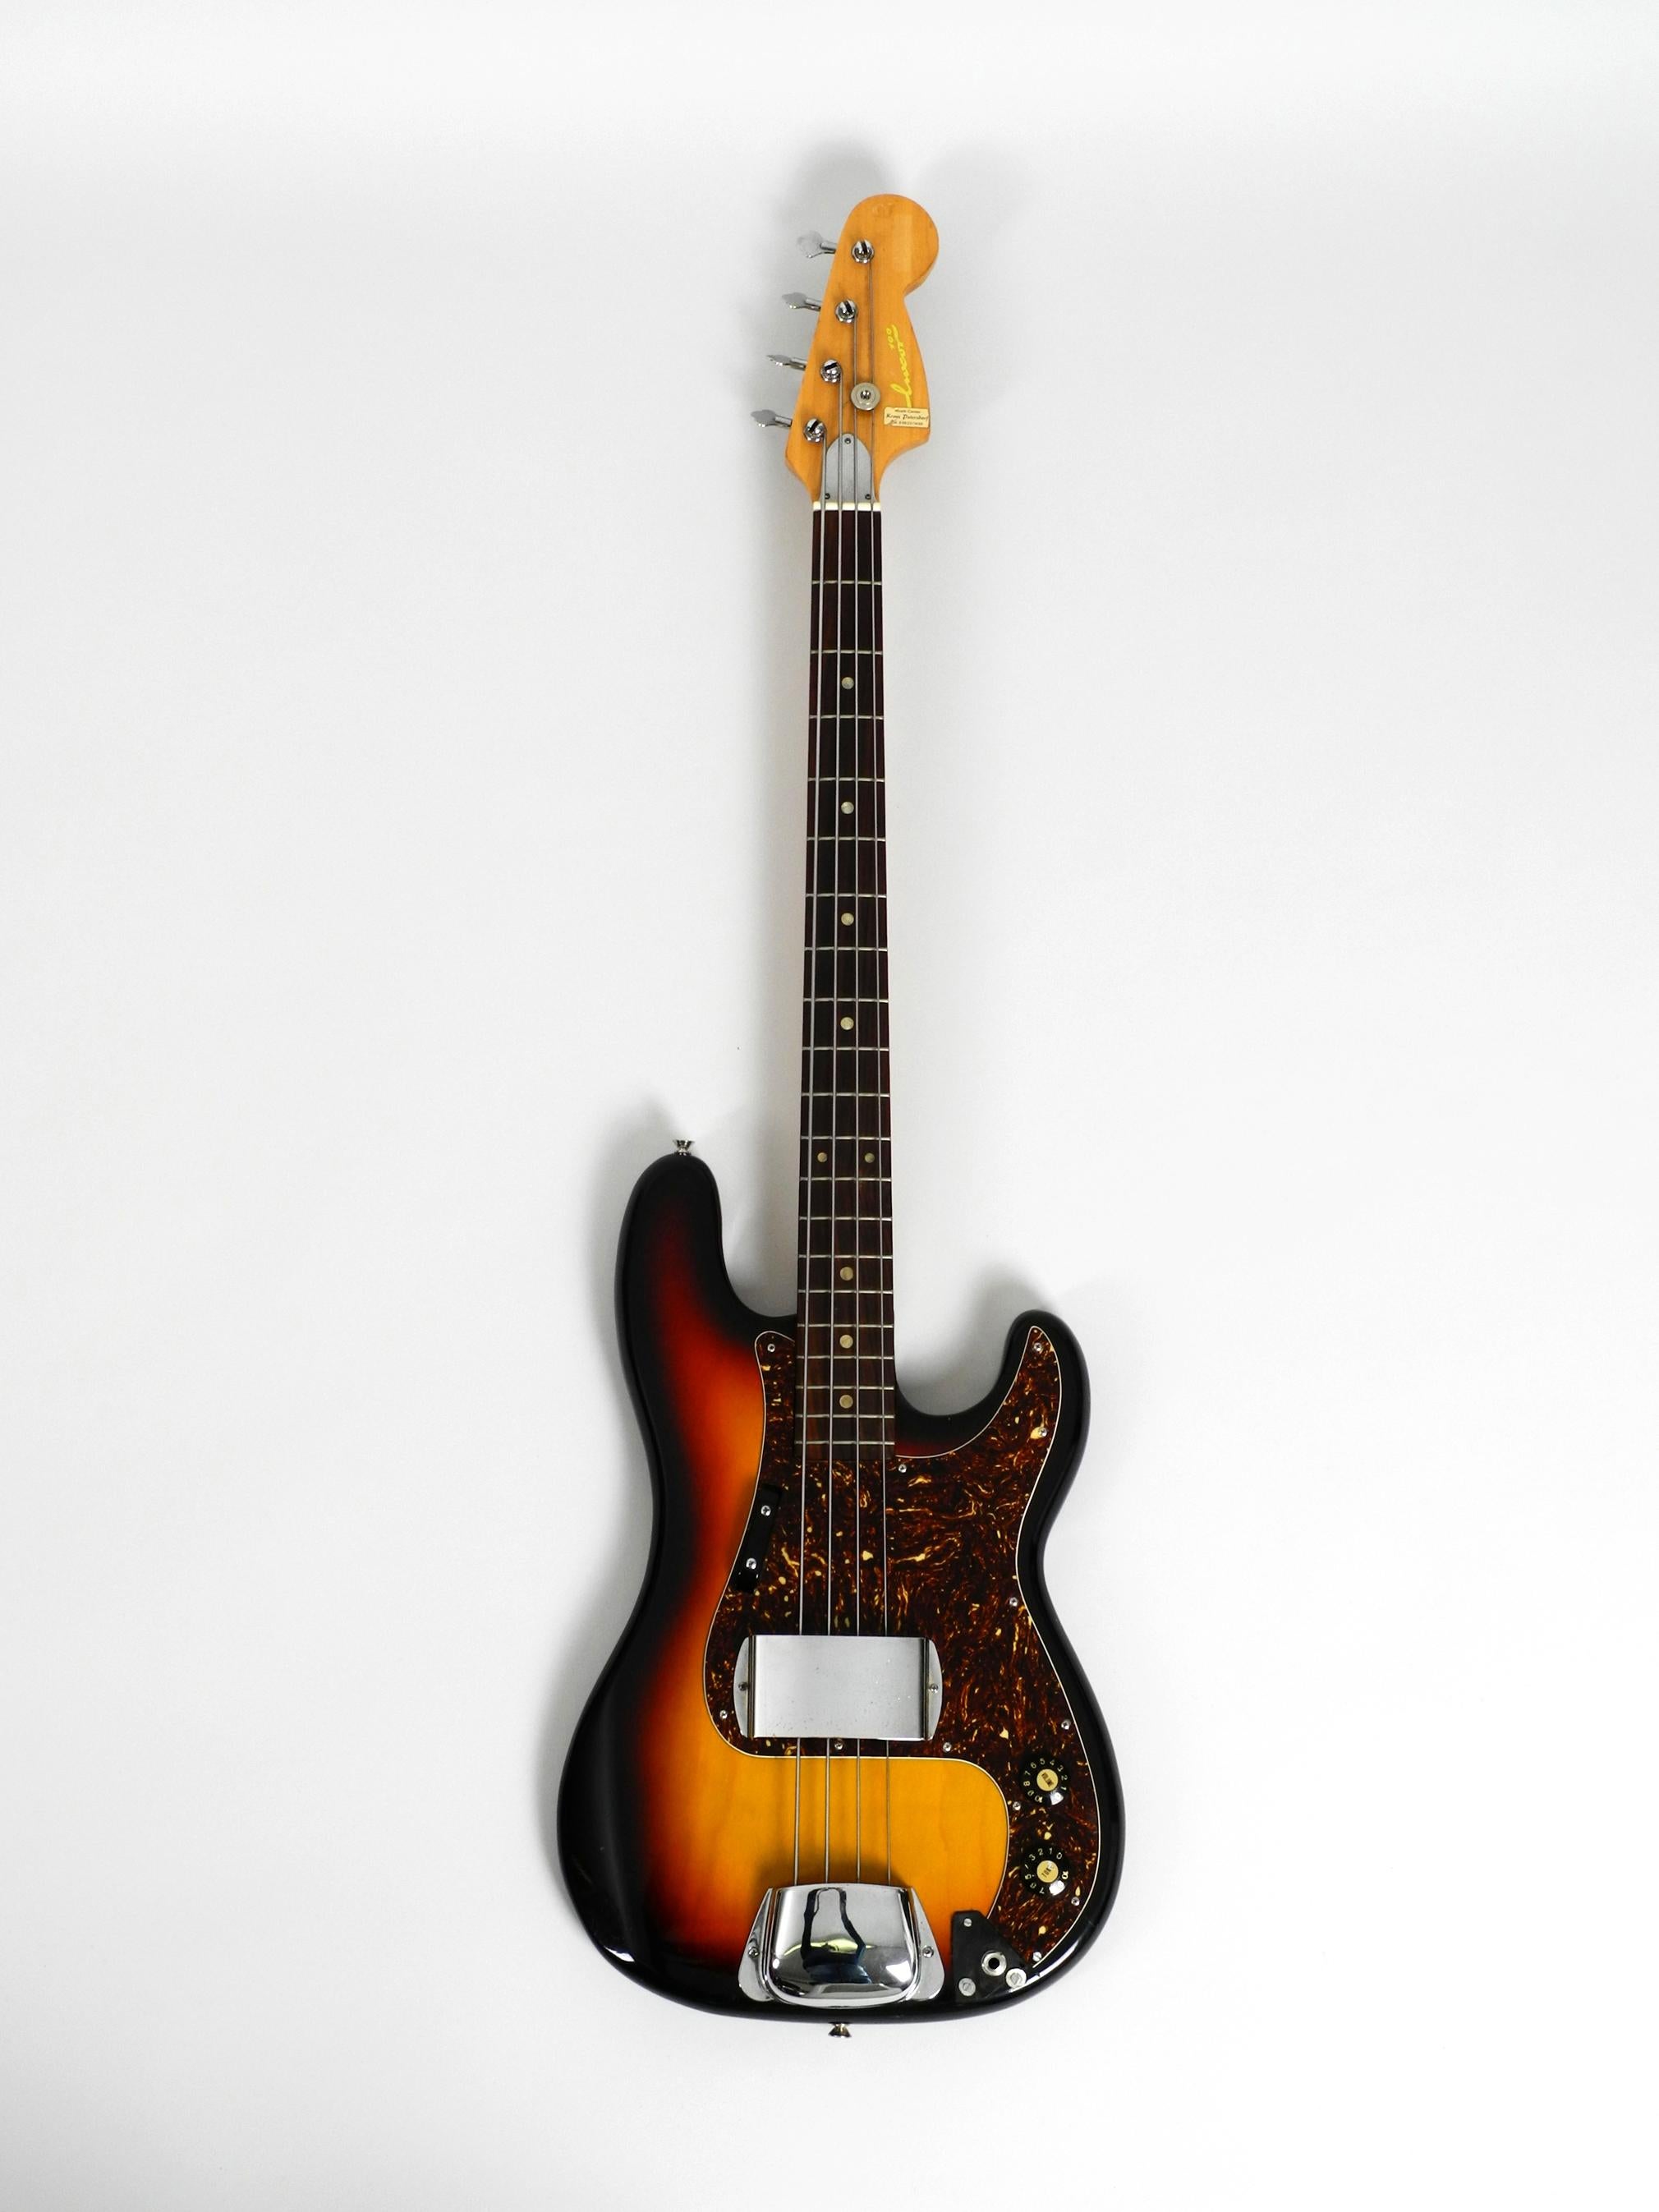 Rare very nice original 1970s vintage electric jazz bass guitar luxor 100.
Made by Matsumoku or Ibanez. Made in Japan.
The body is made of laminated wood, the neck is made of maple wood.
I had let the guitar tested in a guitar shop and everything